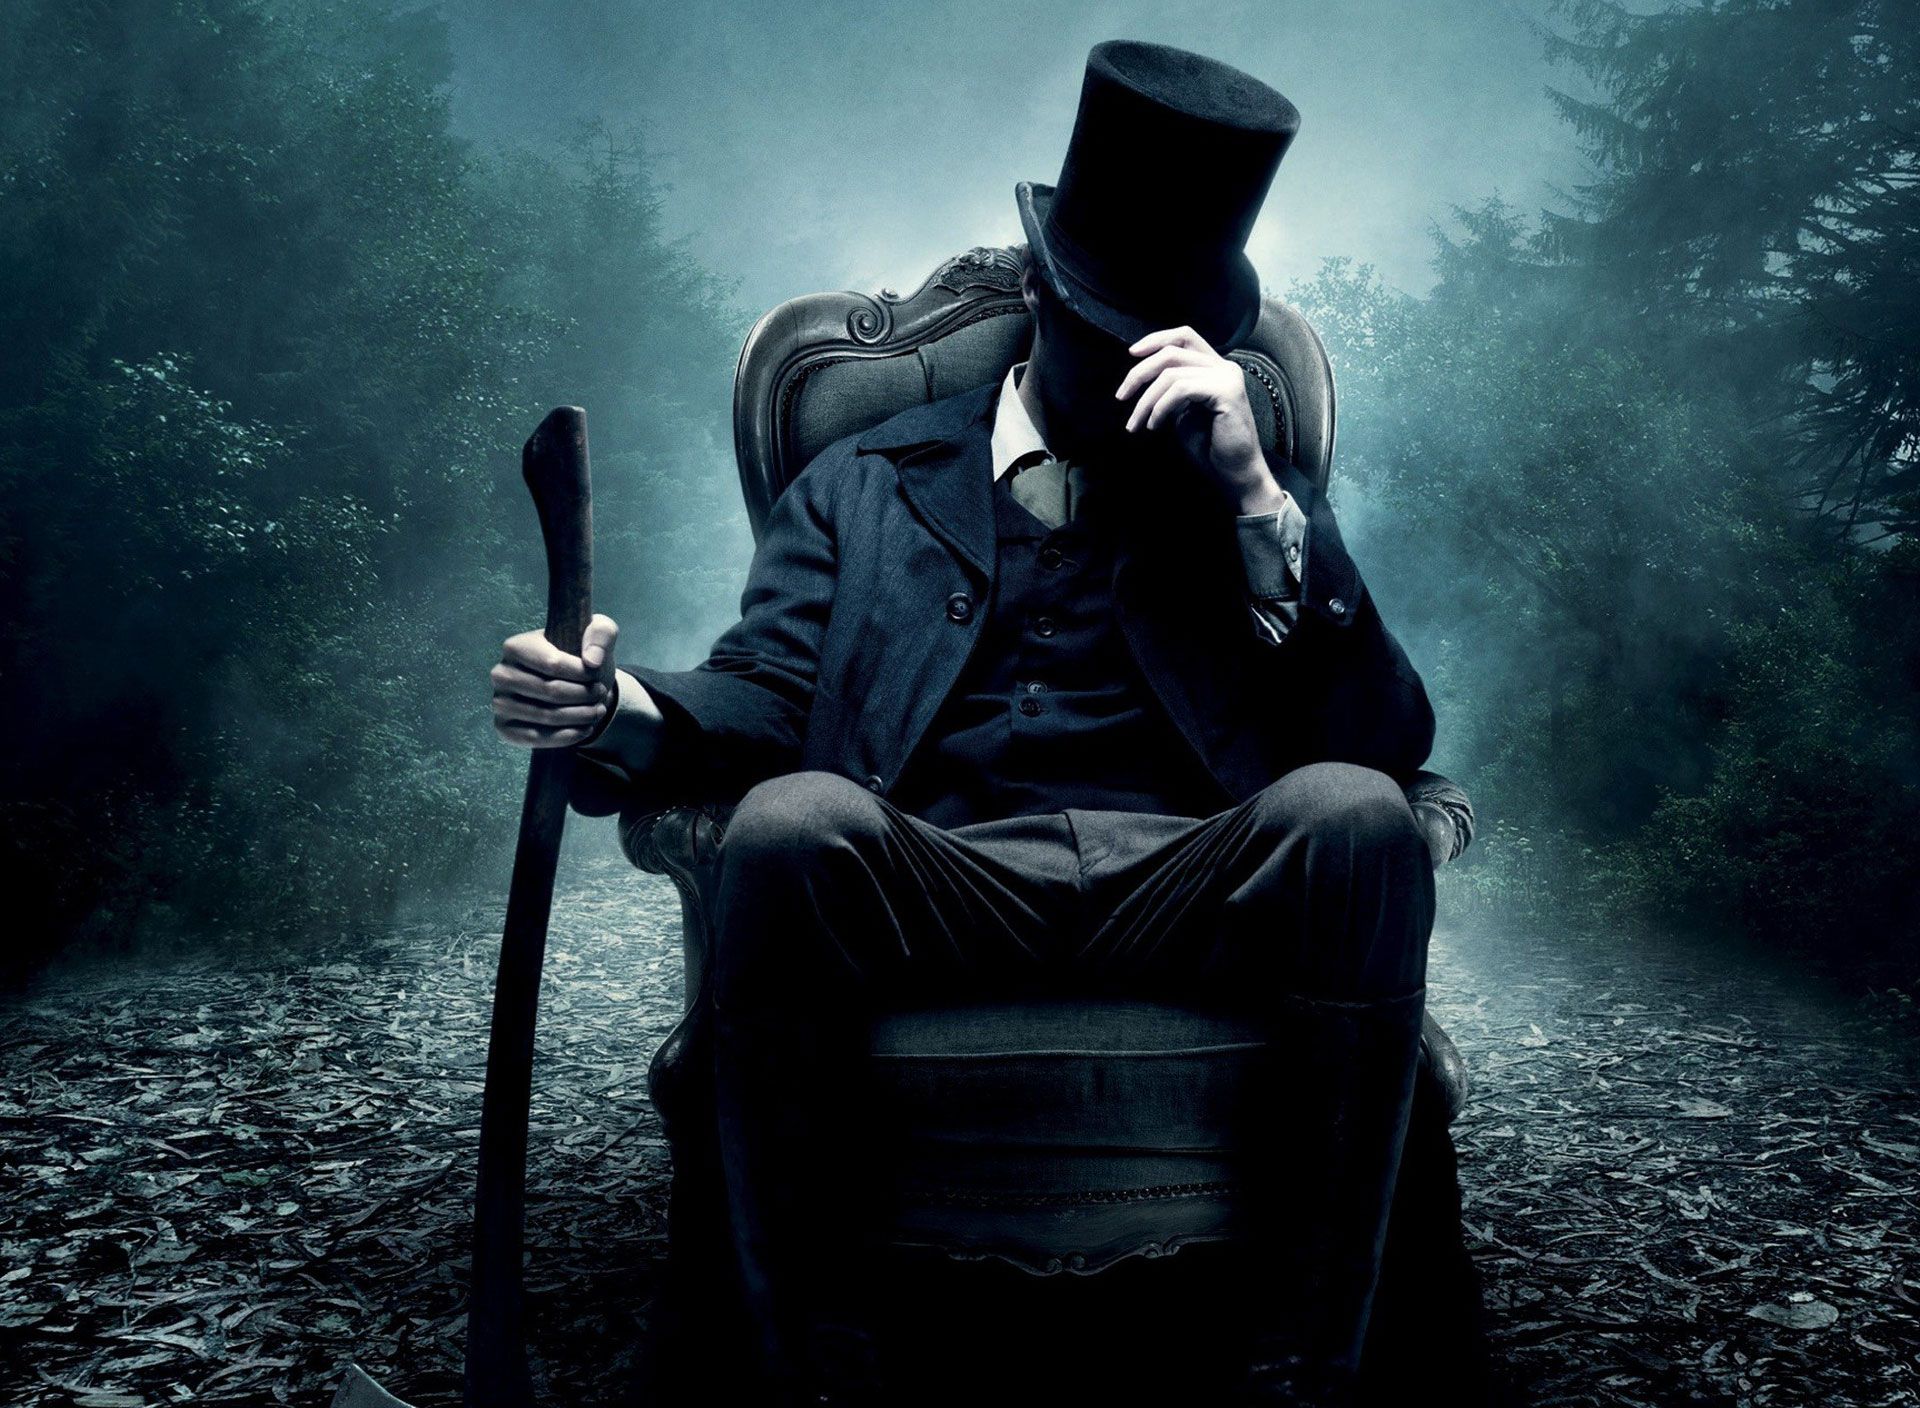 Abraham Lincoln Vampire Hunter Tablet wallpapers and backgrounds ...